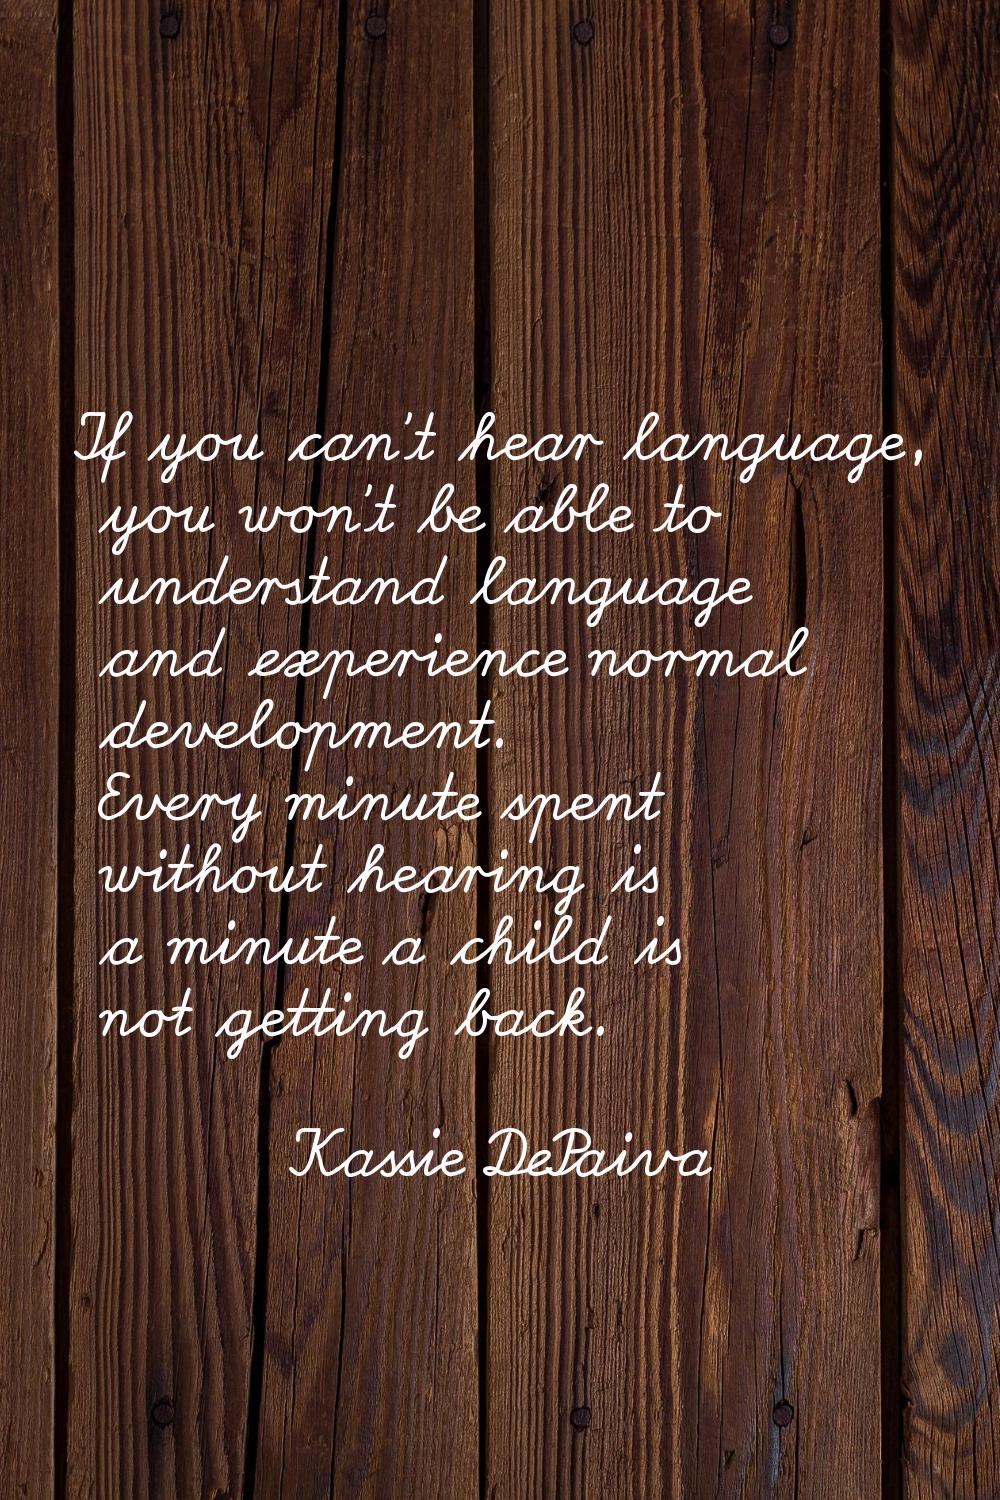 If you can't hear language, you won't be able to understand language and experience normal developm